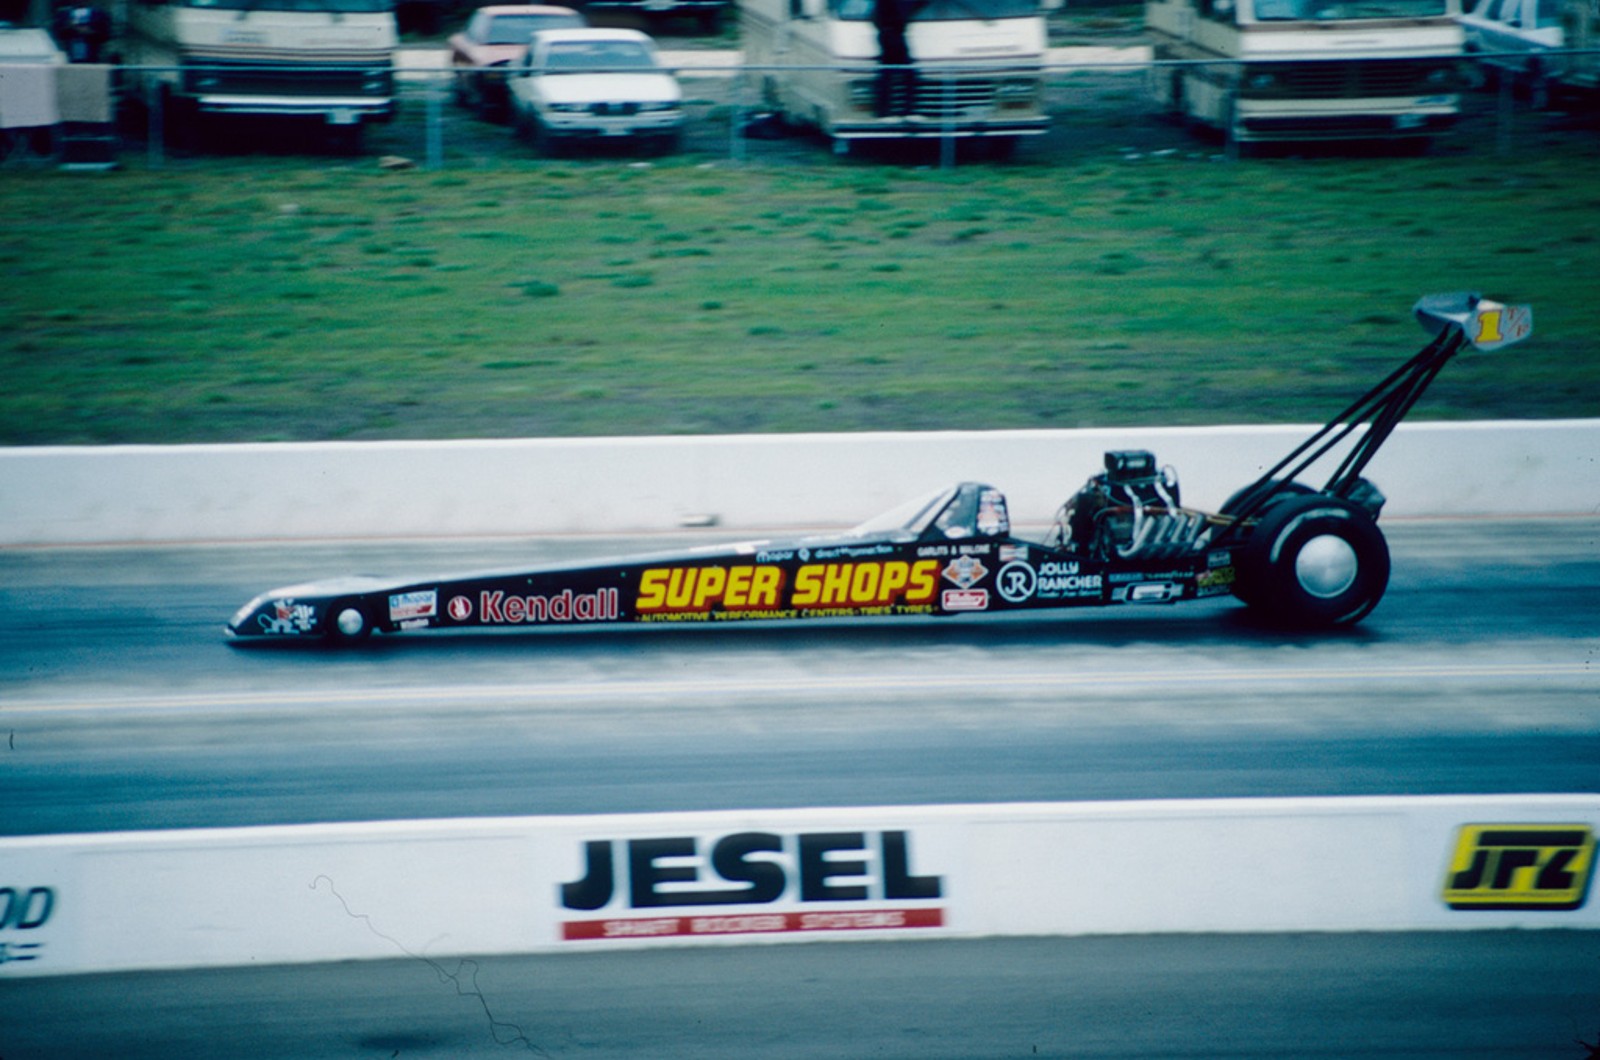 <p>Built by pioneering drag racer Don “Big Daddy” Garlits, the Swamp Rat XXX was a top-fuel class drag racing car known for its groundbreaking design and record-setting speed. It is the only dragster of its kind to be enshrined in the National Museum of American History.</p><p>The Swamp Rat XXX featured a rear engine, an enclosed streamlined driver’s cockpit, and extremely small front wheels to maximize speed and safety, which was to be the paradigm of drag racing in the 1980s. With its record-setting speed of 272.56 mph from a standing start, Swamp Rat XXX secured the National Hot Rod Association’s championship in 1986, part of Garlit’s impressive total of 144 national event wins.</p>